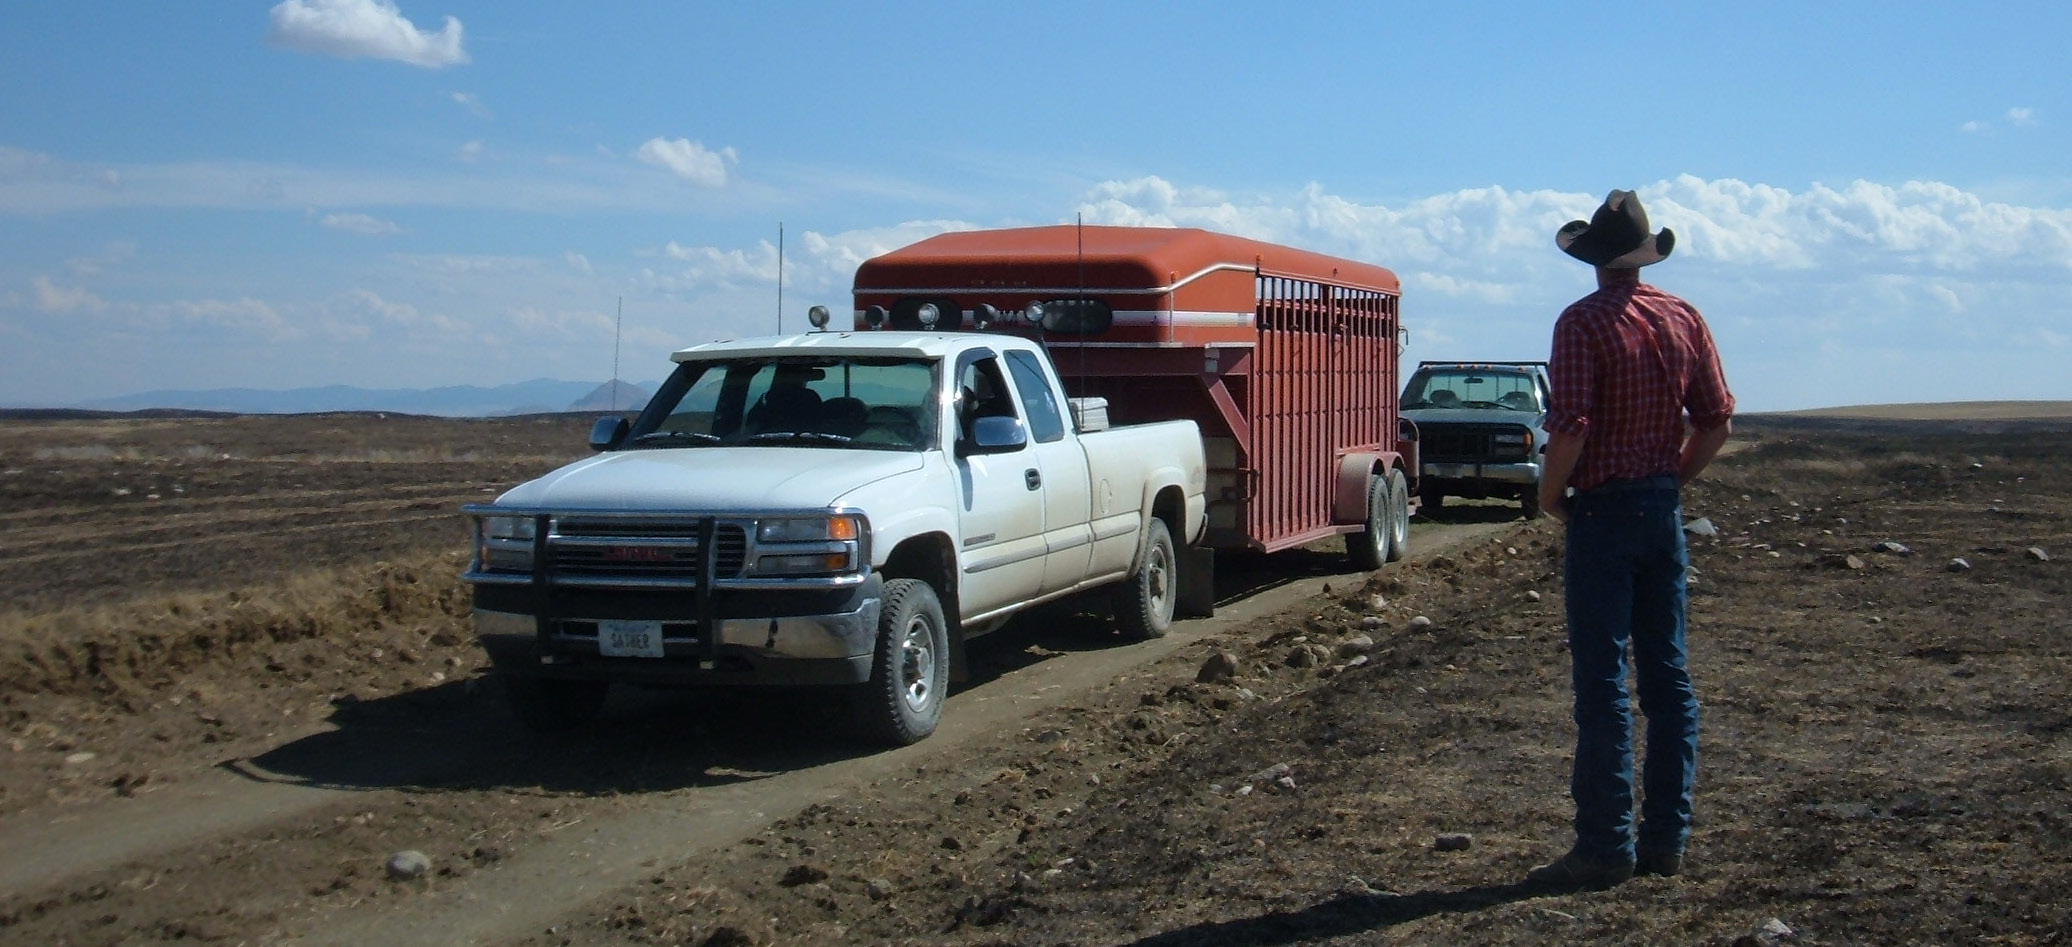 Farmer and Rancher with Trailer